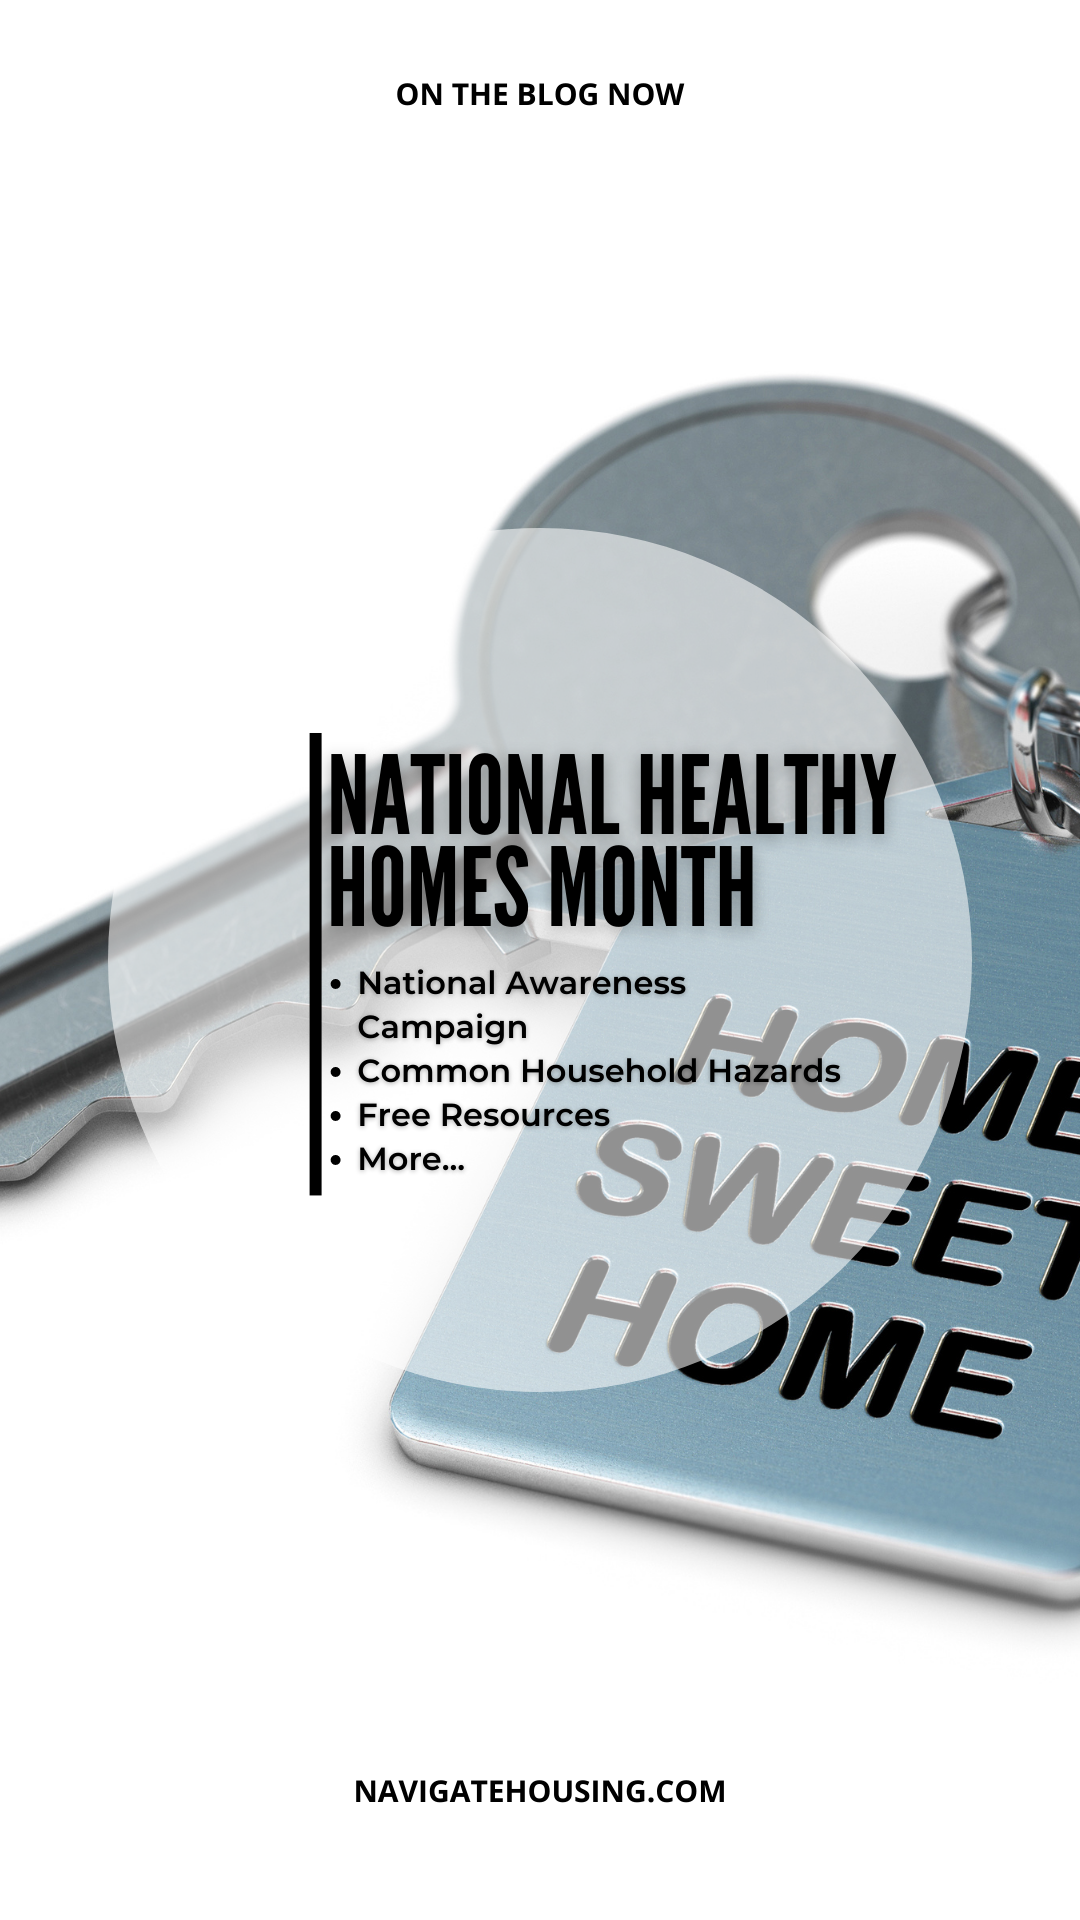 National Healthy Homes Month